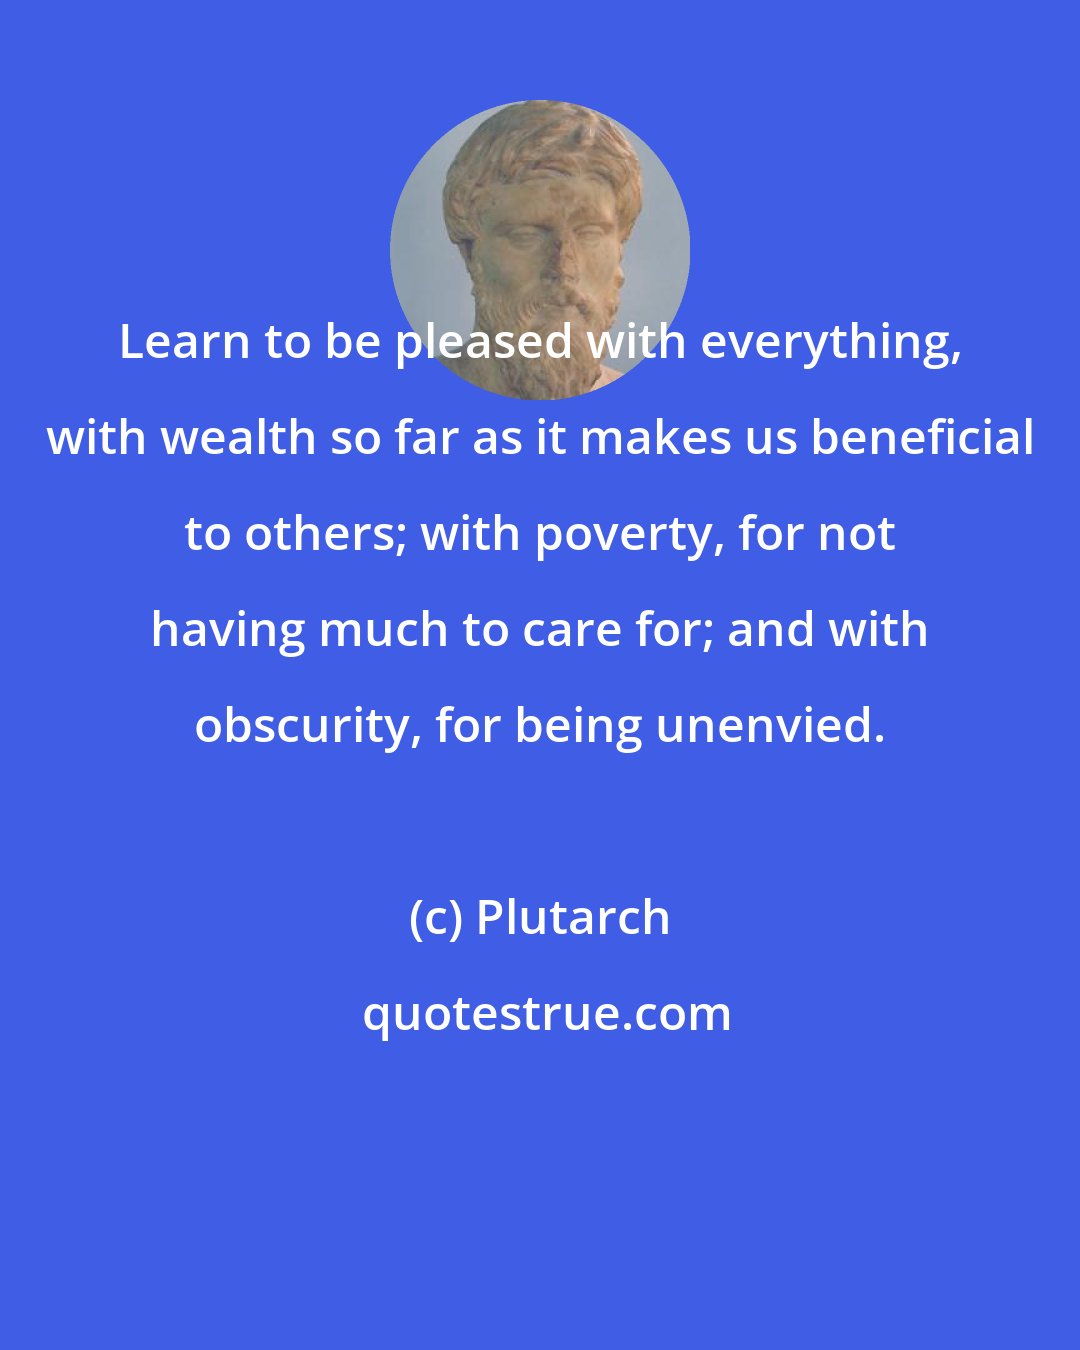 Plutarch: Learn to be pleased with everything, with wealth so far as it makes us beneficial to others; with poverty, for not having much to care for; and with obscurity, for being unenvied.